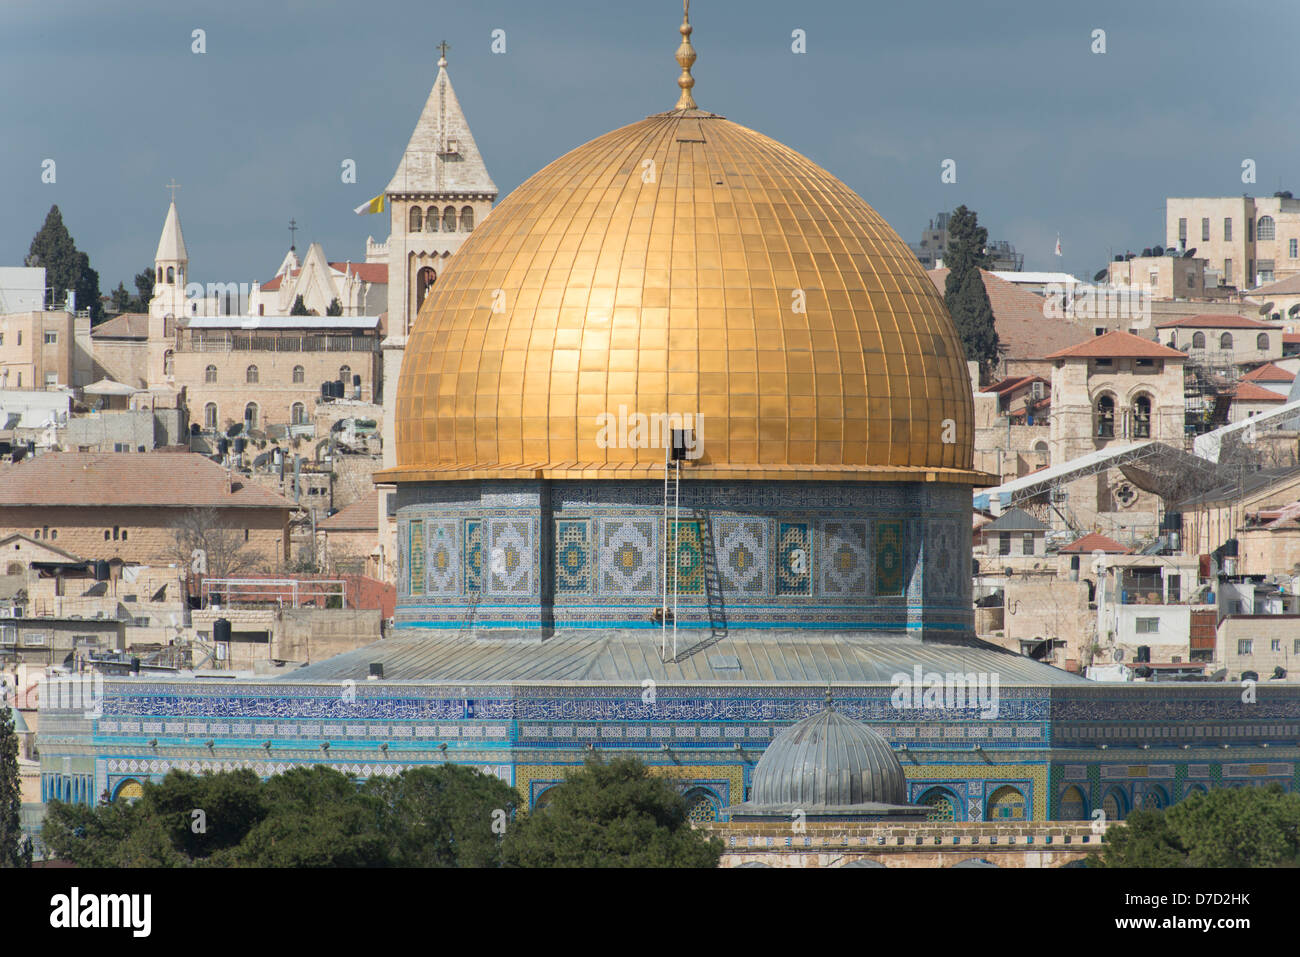 Details of The golden dome of the Islamic Dome of the Rock in Jerusalem, viewed from the Mount of Olives Stock Photo